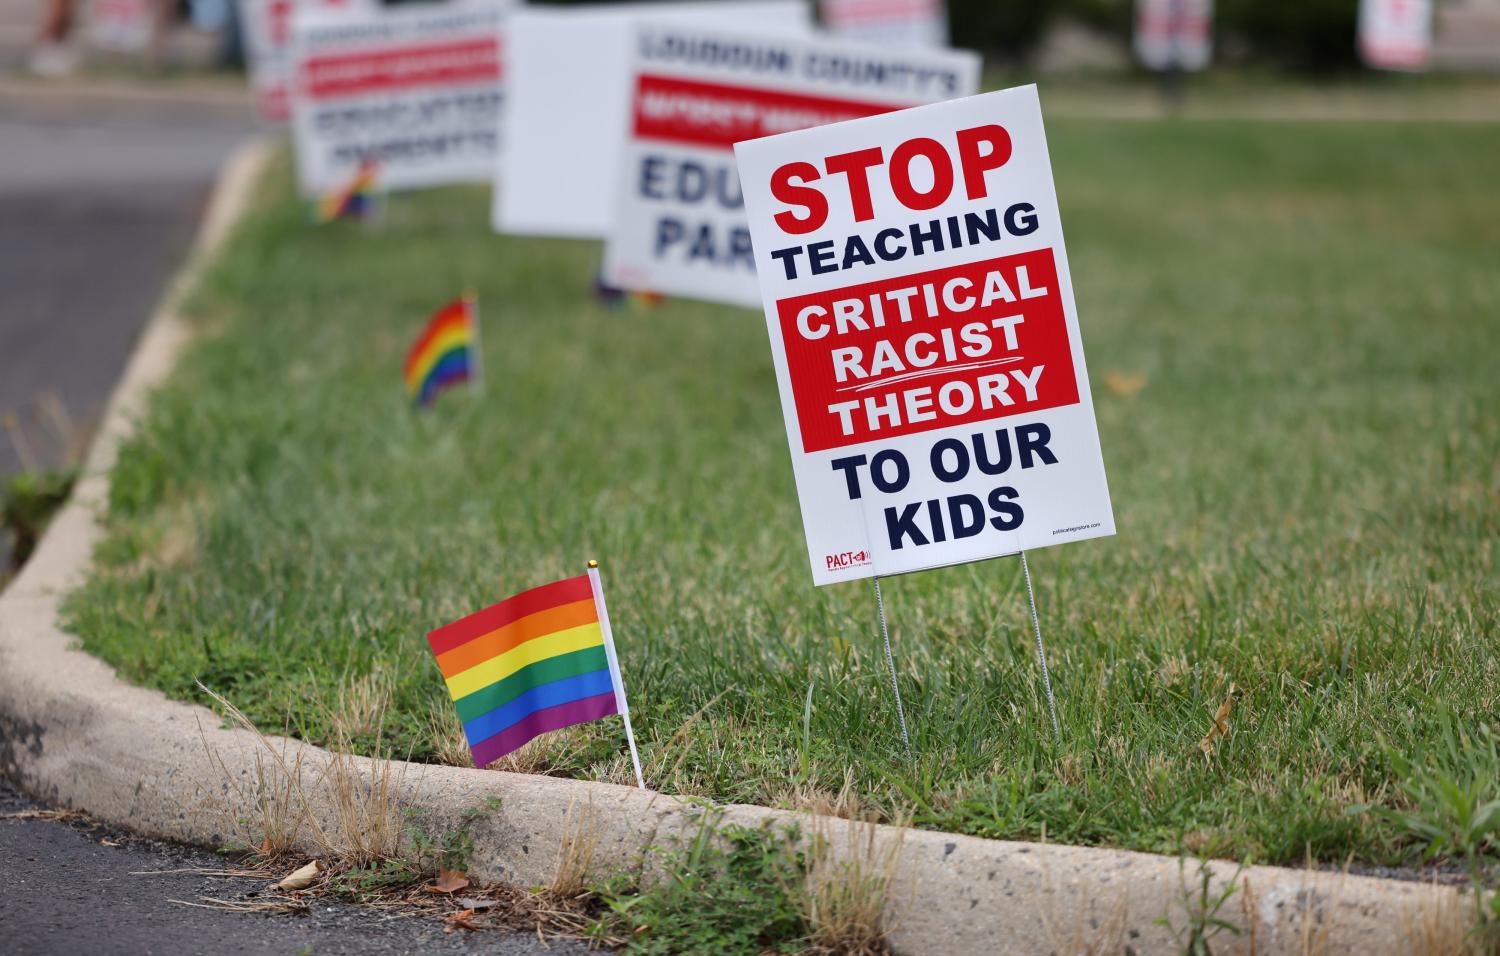 Signs opposing Critical Race Theory line the entrance to the Loudoun County School Board headquarters, in Ashburn, Virginia, U.S. June 22, 2021. REUTERS/Evelyn Hockstein